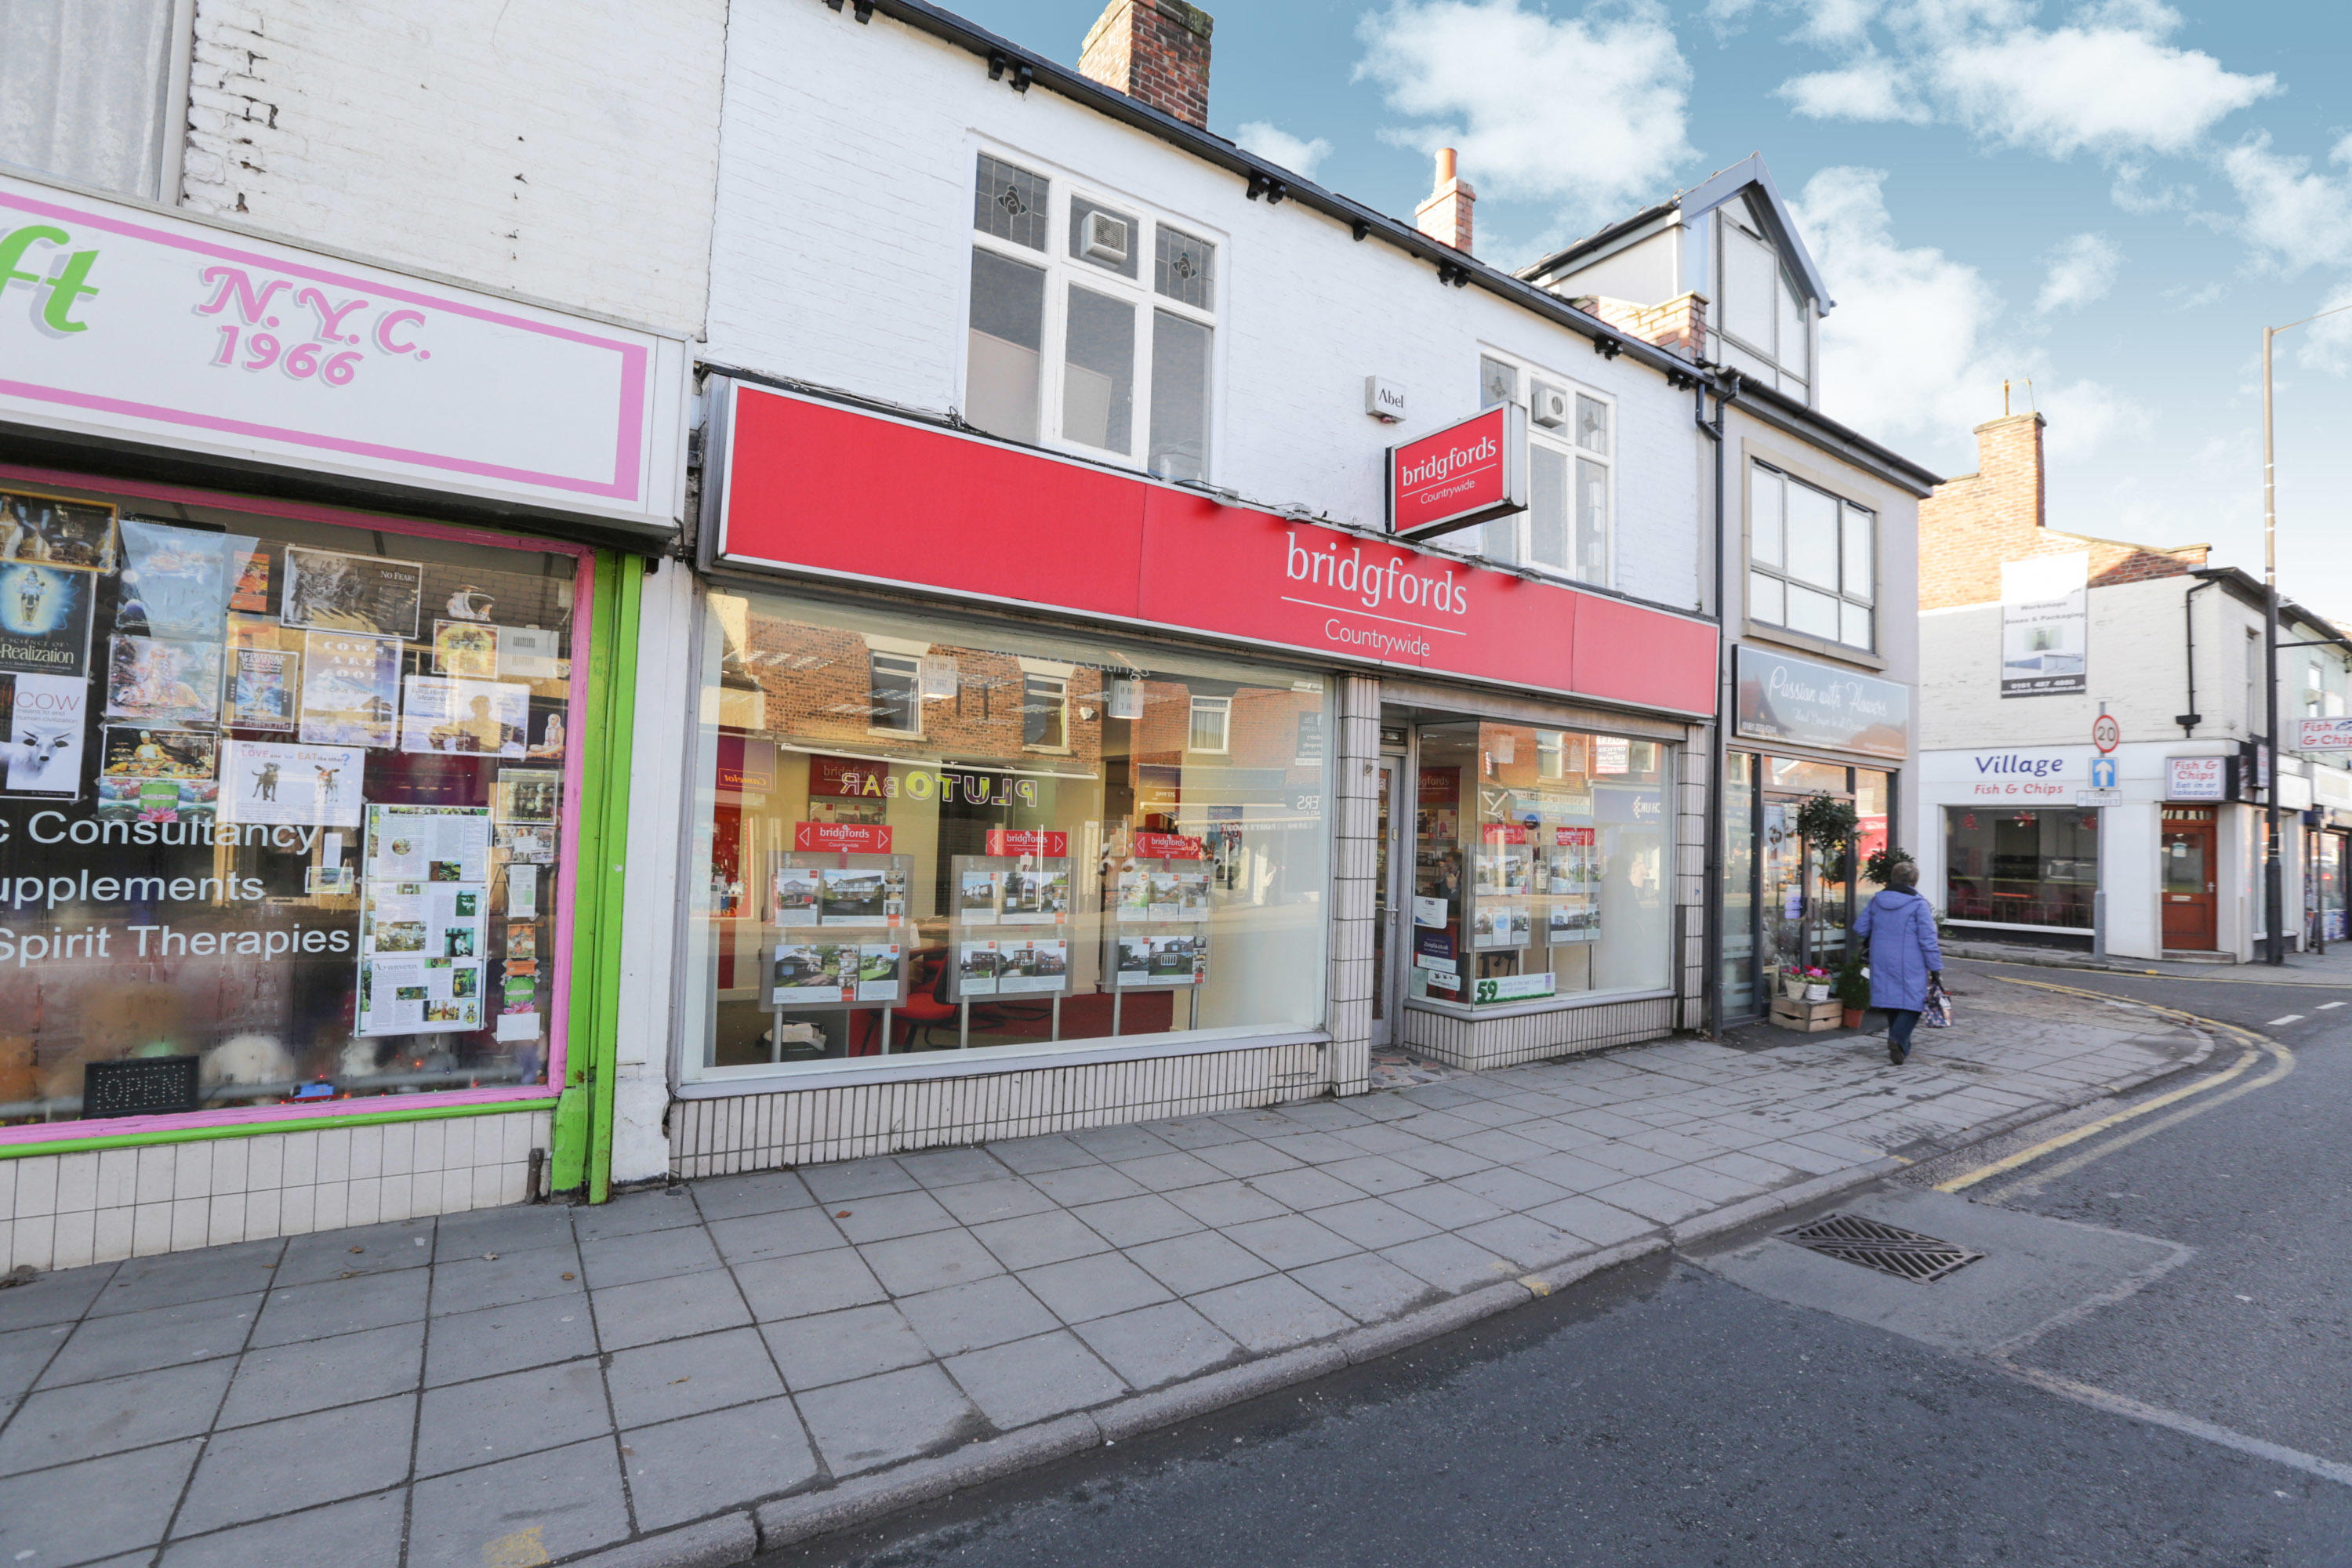 Images Bridgfords Sales and Letting Agents Hazel Grove